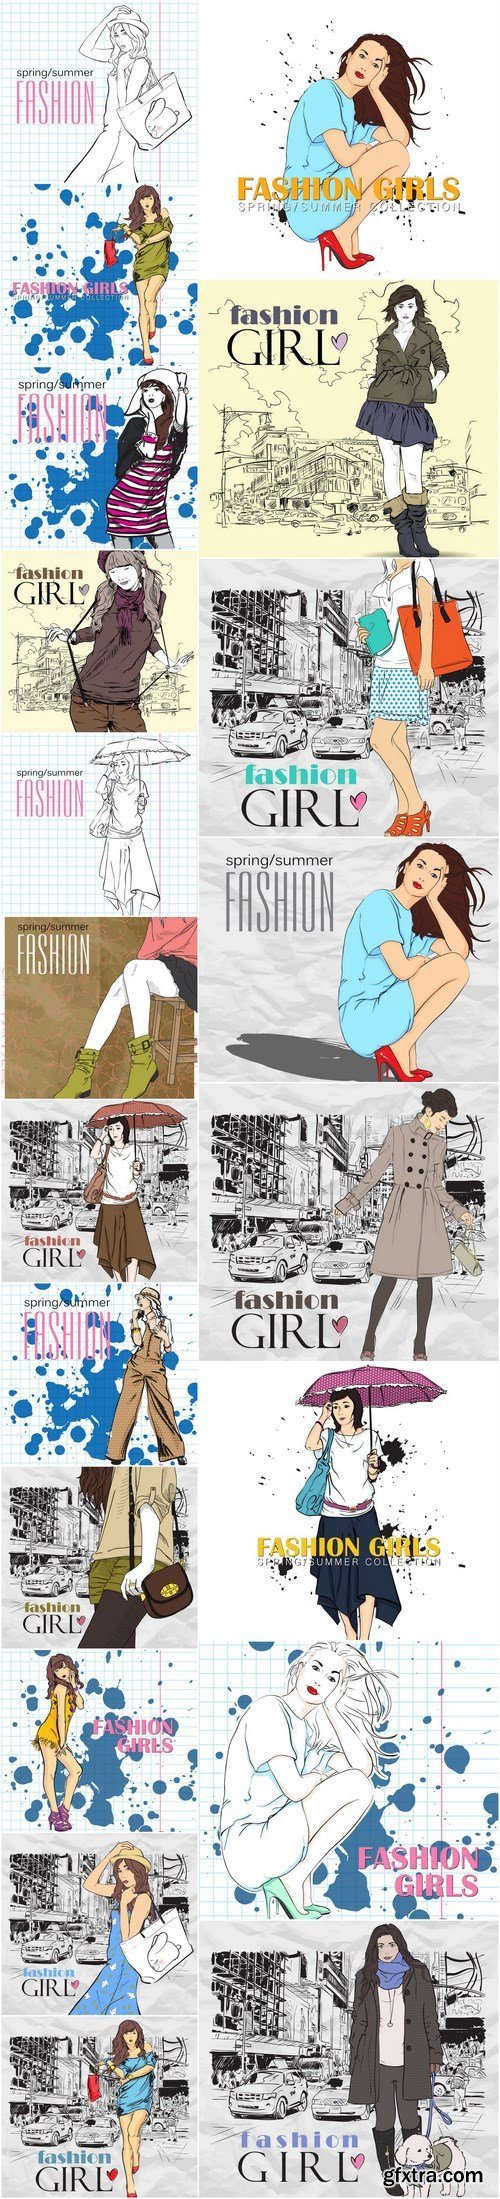 Female Fashion and Style - 20xEPS